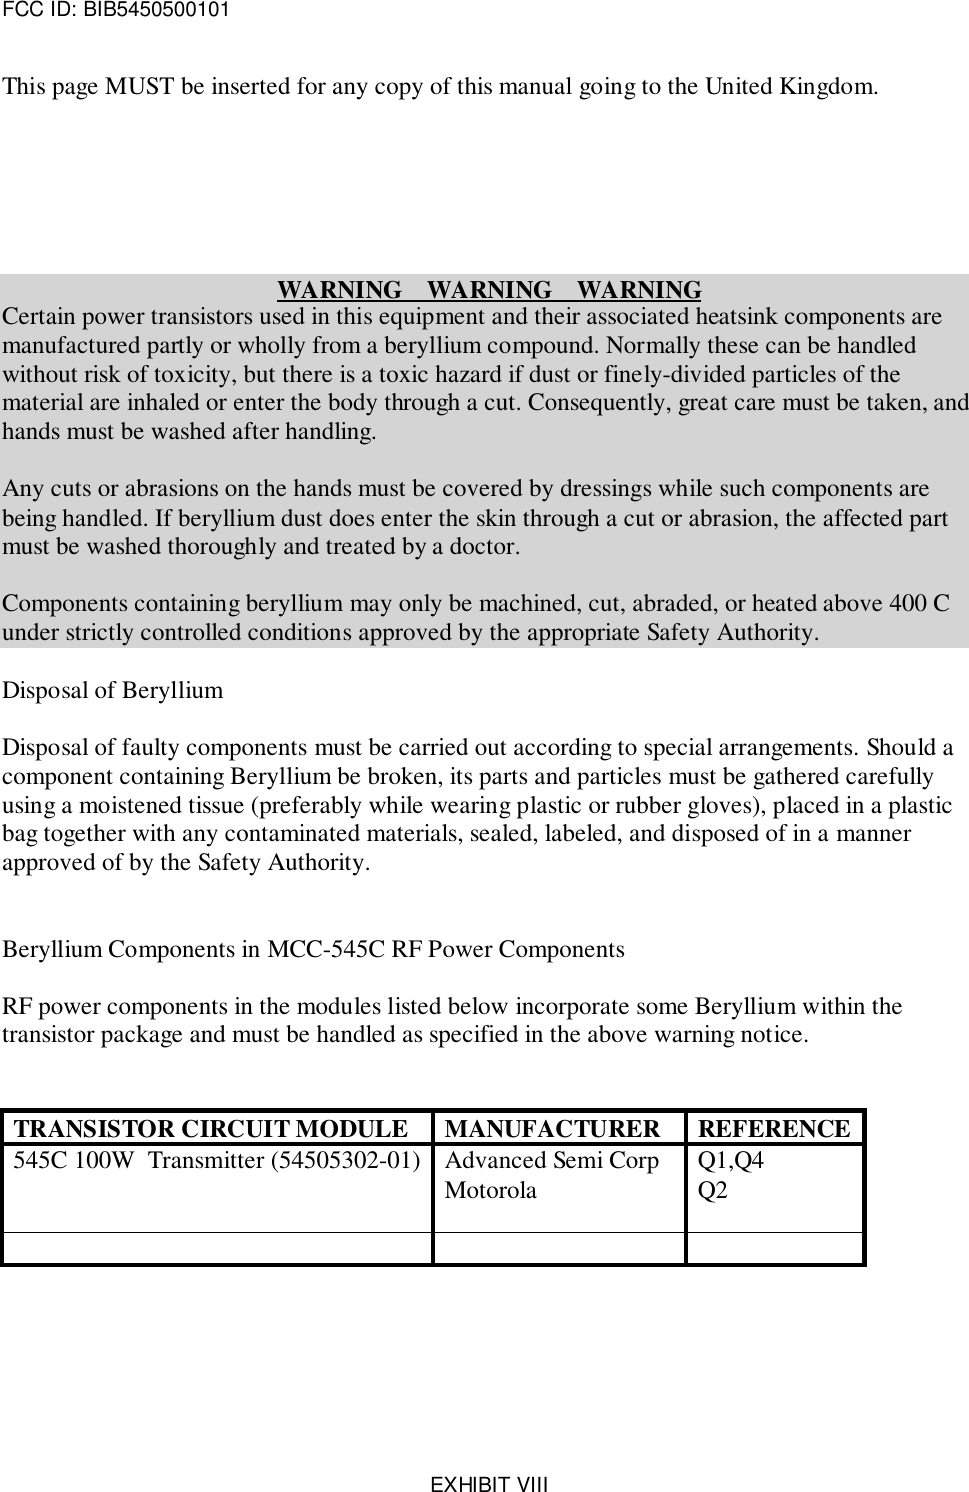 FCC ID: BIB5450500101EXHIBIT VIIIThis page MUST be inserted for any copy of this manual going to the United Kingdom.WARNING    WARNING    WARNINGCertain power transistors used in this equipment and their associated heatsink components aremanufactured partly or wholly from a beryllium compound. Normally these can be handledwithout risk of toxicity, but there is a toxic hazard if dust or finely-divided particles of thematerial are inhaled or enter the body through a cut. Consequently, great care must be taken, andhands must be washed after handling.Any cuts or abrasions on the hands must be covered by dressings while such components arebeing handled. If beryllium dust does enter the skin through a cut or abrasion, the affected partmust be washed thoroughly and treated by a doctor.Components containing beryllium may only be machined, cut, abraded, or heated above 400 Cunder strictly controlled conditions approved by the appropriate Safety Authority.Disposal of BerylliumDisposal of faulty components must be carried out according to special arrangements. Should acomponent containing Beryllium be broken, its parts and particles must be gathered carefullyusing a moistened tissue (preferably while wearing plastic or rubber gloves), placed in a plasticbag together with any contaminated materials, sealed, labeled, and disposed of in a mannerapproved of by the Safety Authority.Beryllium Components in MCC-545C RF Power ComponentsRF power components in the modules listed below incorporate some Beryllium within thetransistor package and must be handled as specified in the above warning notice.TRANSISTOR CIRCUIT MODULE MANUFACTURER REFERENCE545C 100W  Transmitter (54505302-01) Advanced Semi CorpMotorola Q1,Q4Q2